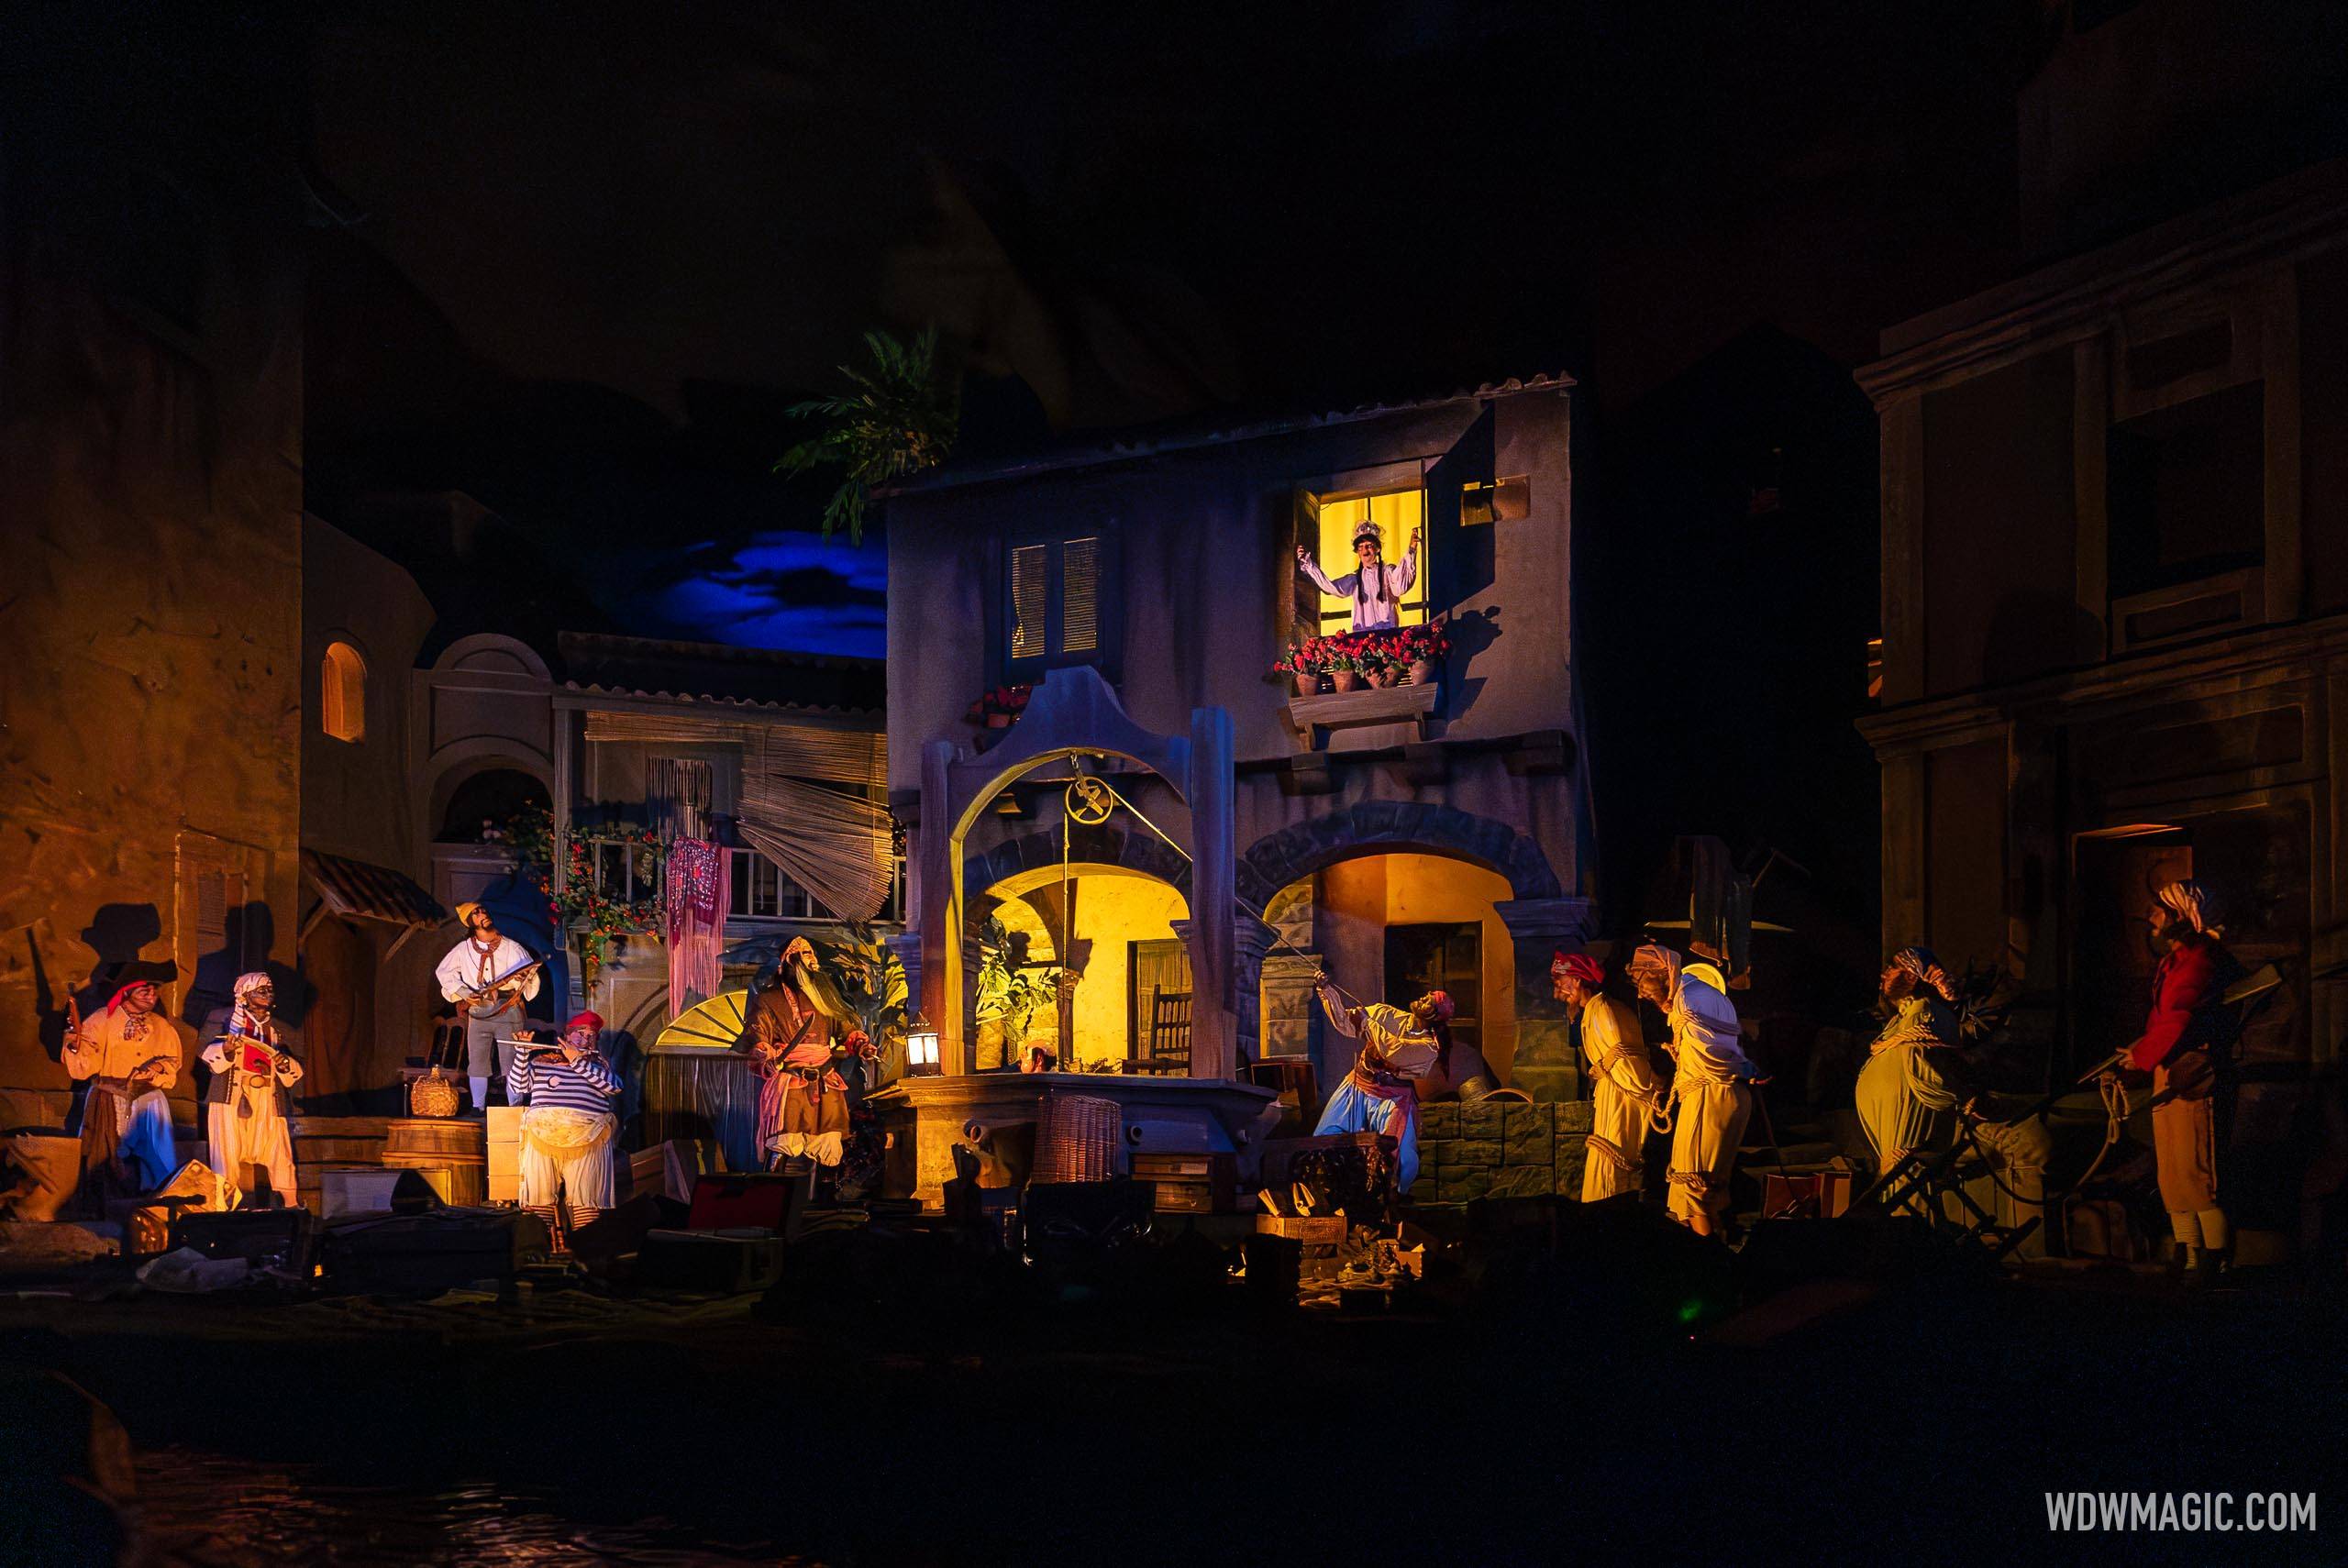 Pirates of the Caribbean refurbishment to begin later than originally planned